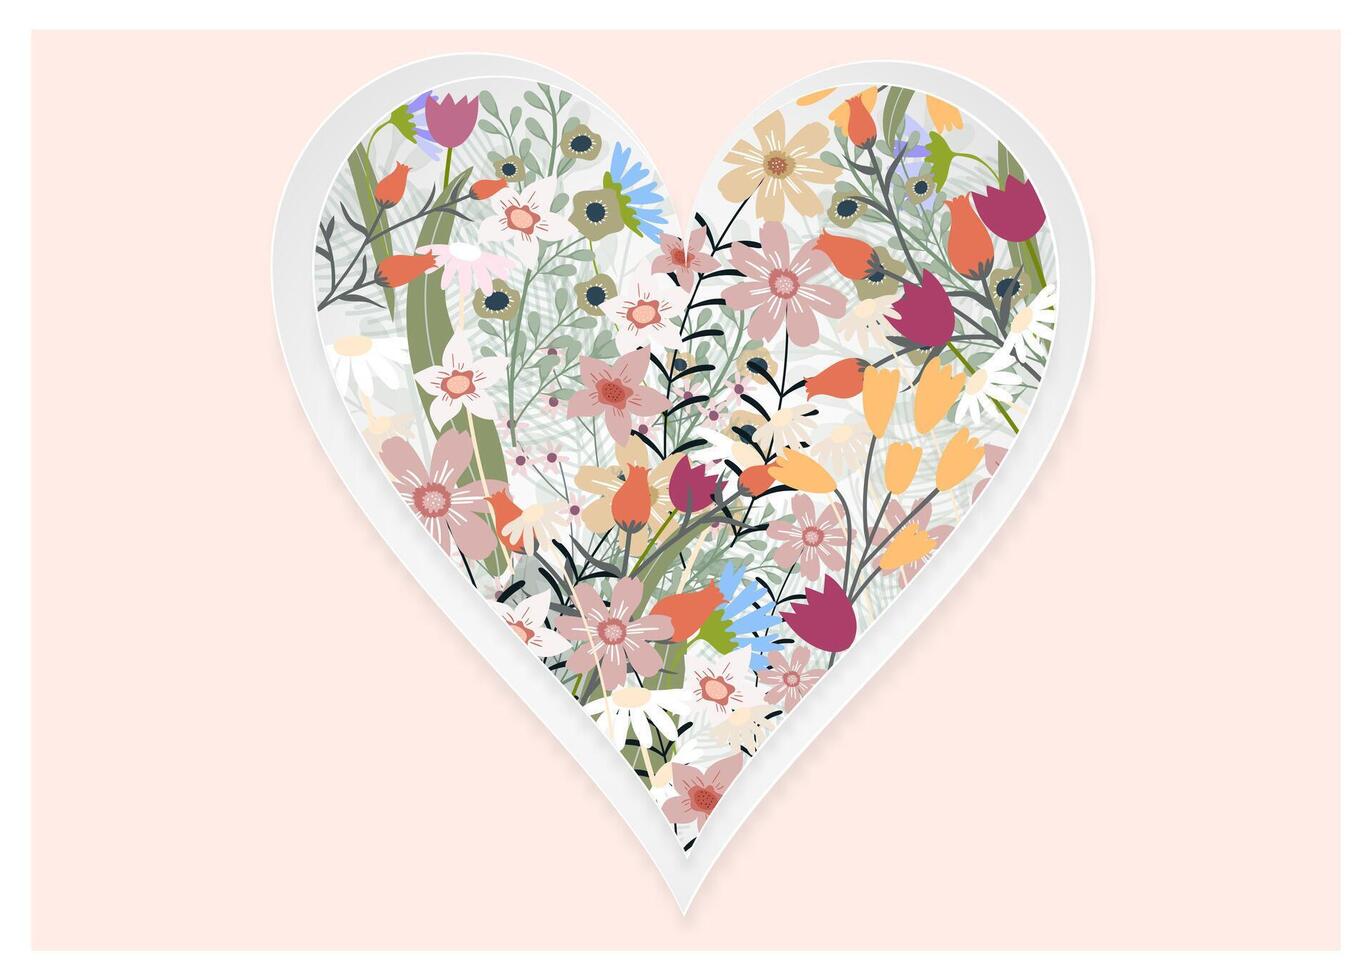 International Women's Day 8 march with frame of flower and leaves,Paper art style.Mother's day greeting card,Beautiful blossom flowers frame on white heart paper cut on peach background,Vector vector